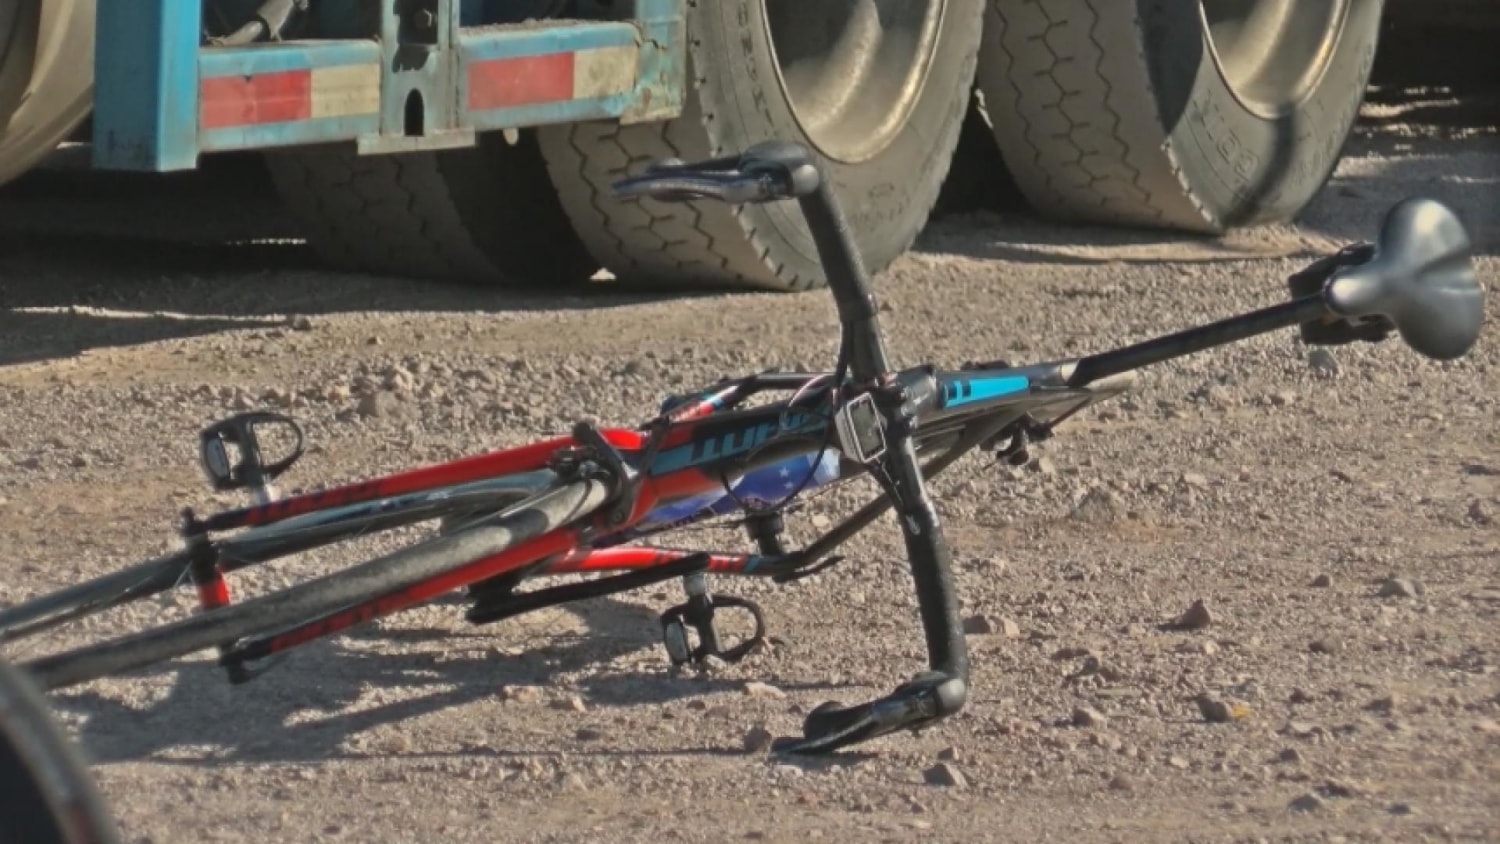 Bicyclist killed in hit-and-run crash in northwest Las Vegas